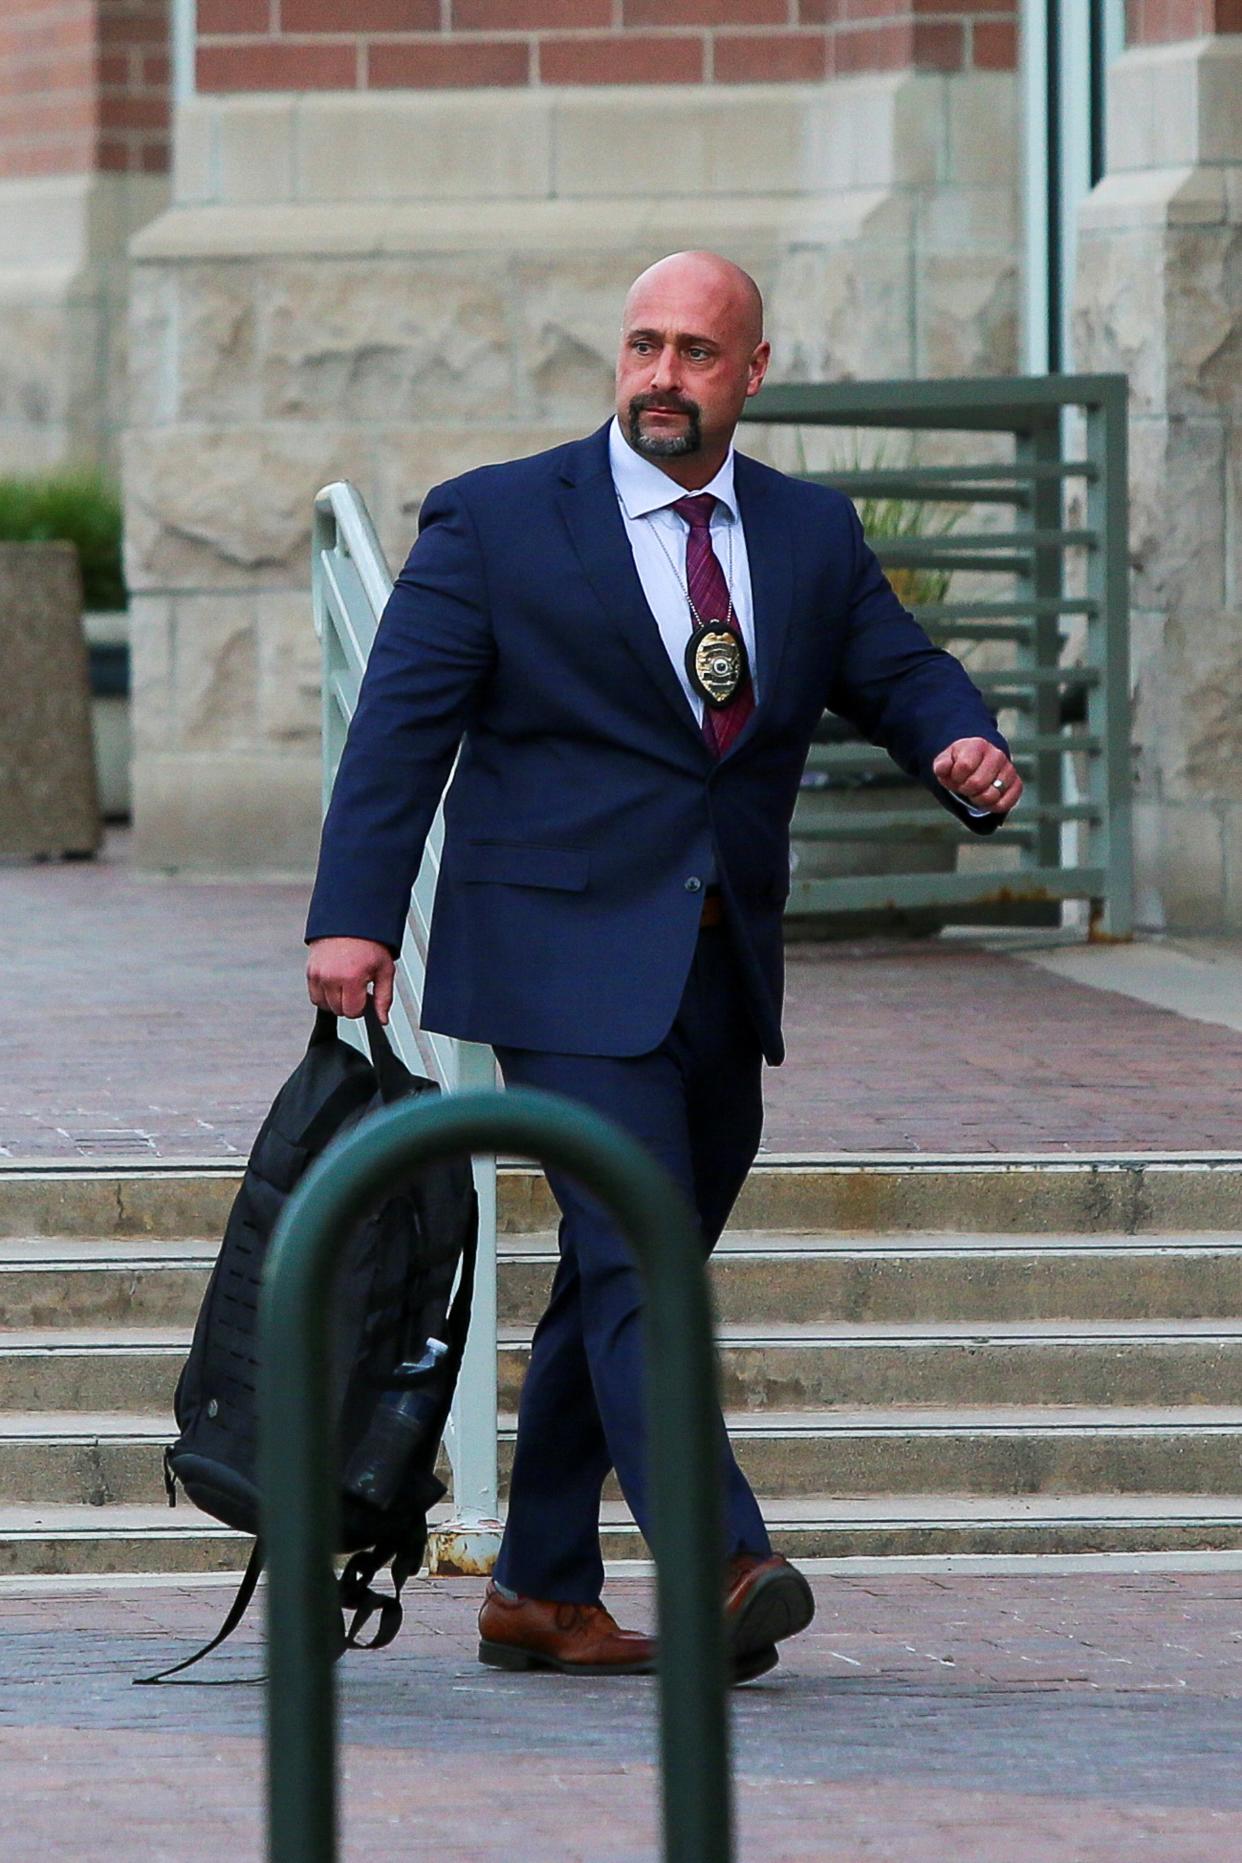 Rexburg Police Detective Ray Hermosillo arrives at the courthouse on the first day of Lori Vallow Daybell's murder trial (REUTERS)